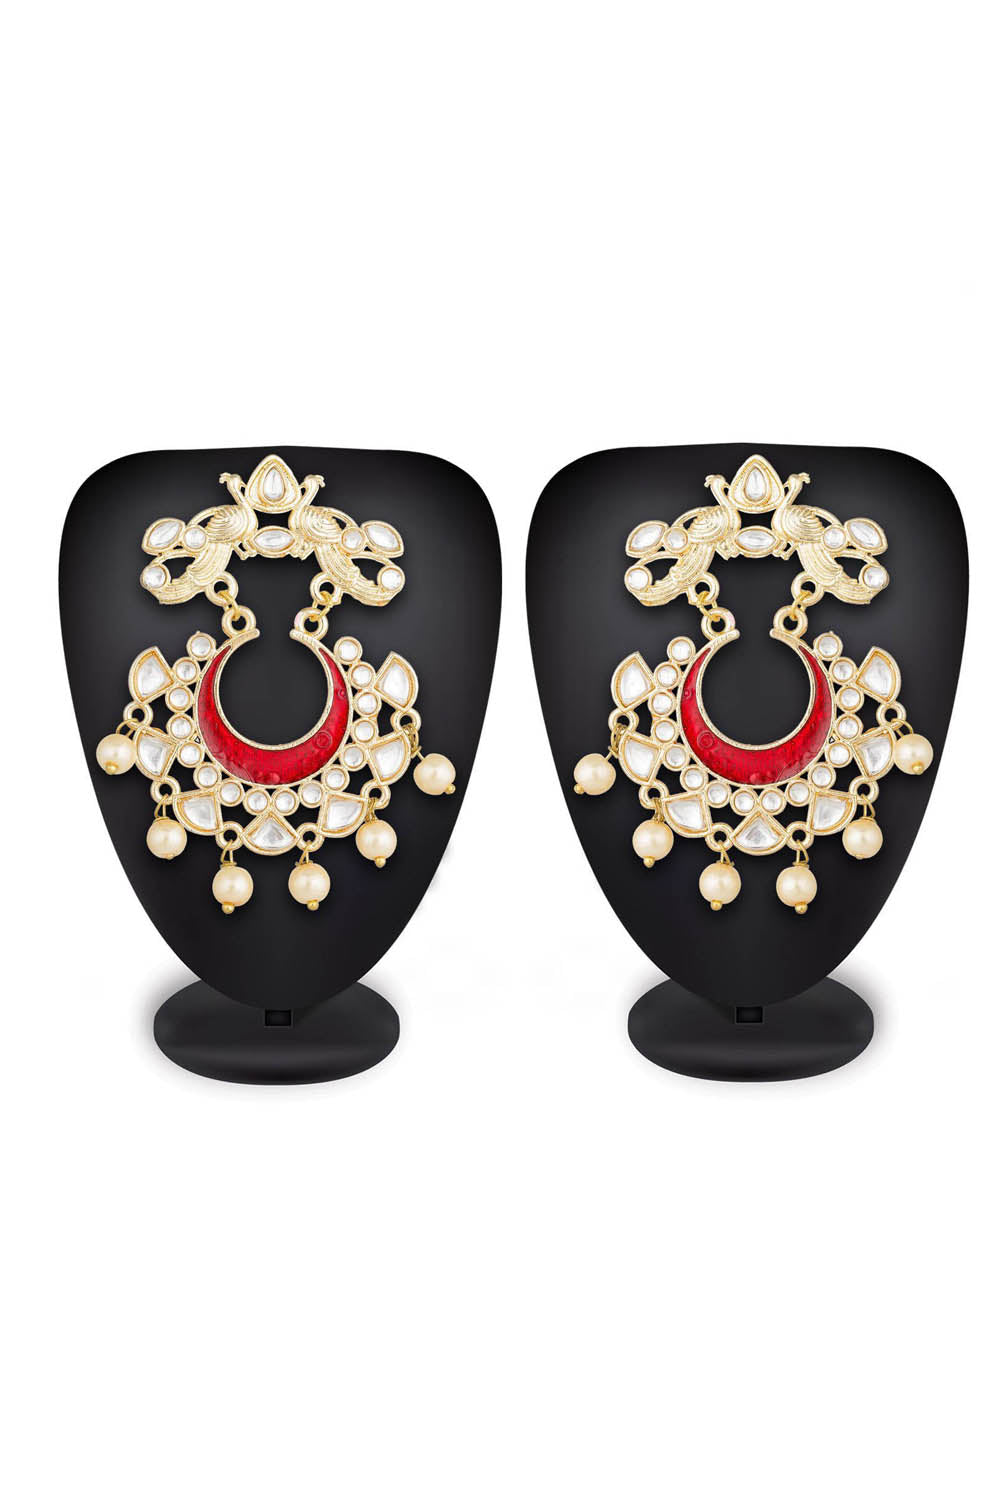 Women's Alloy Earrings in Red and White